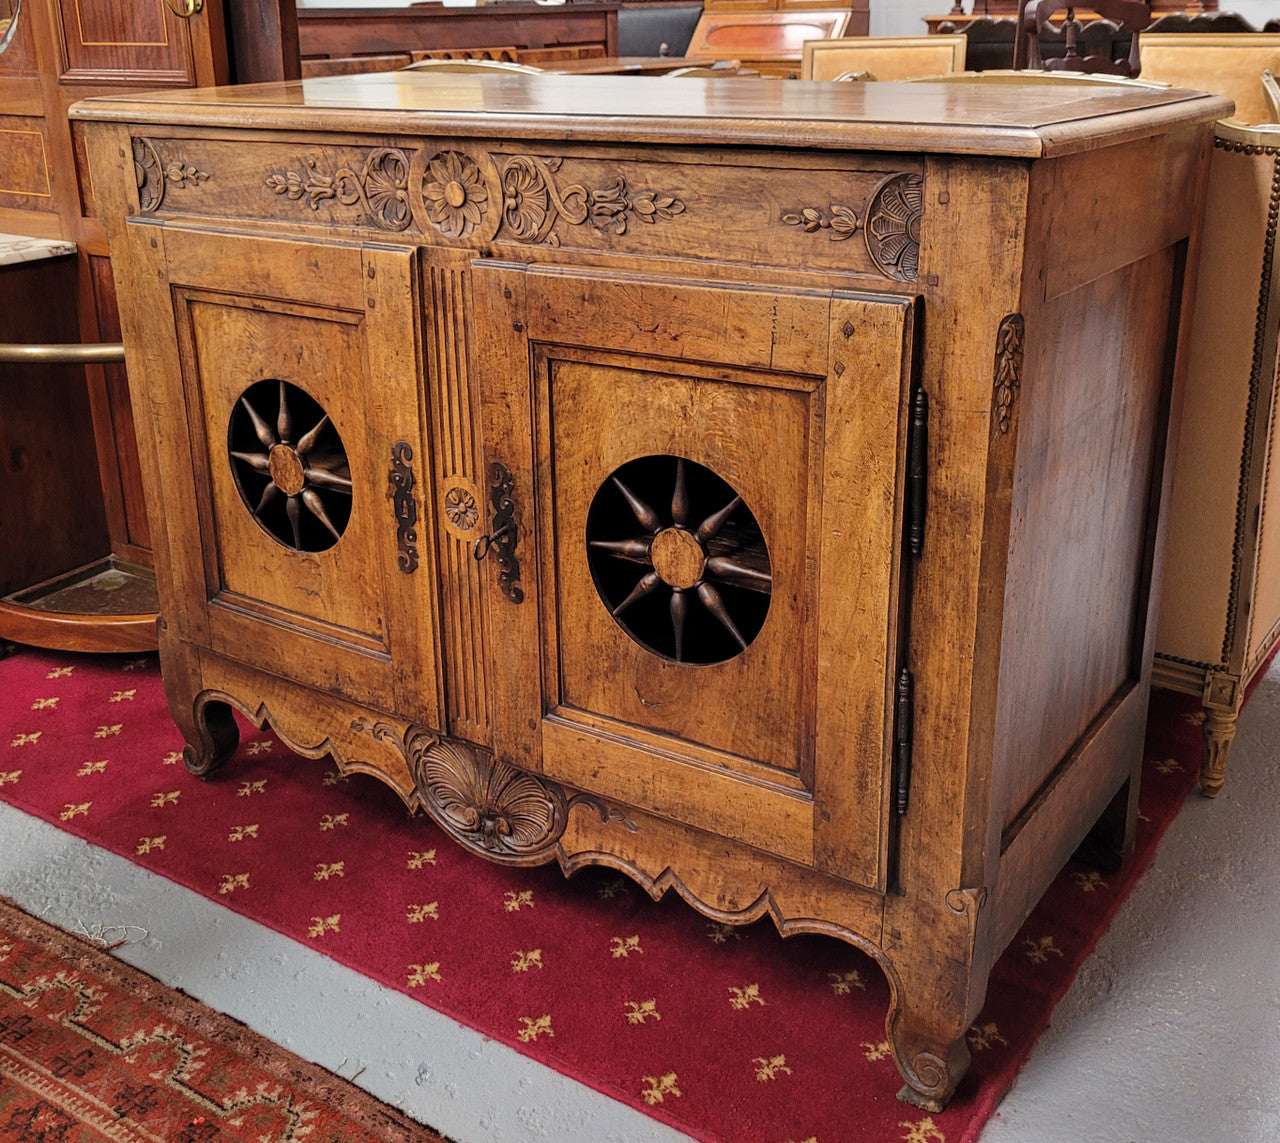 Rare French Antique 18th Century Walnut dough bin. It has two doors, one shelf and the top lifts up to access the dough been. Sourced from France and in good detailed condition.